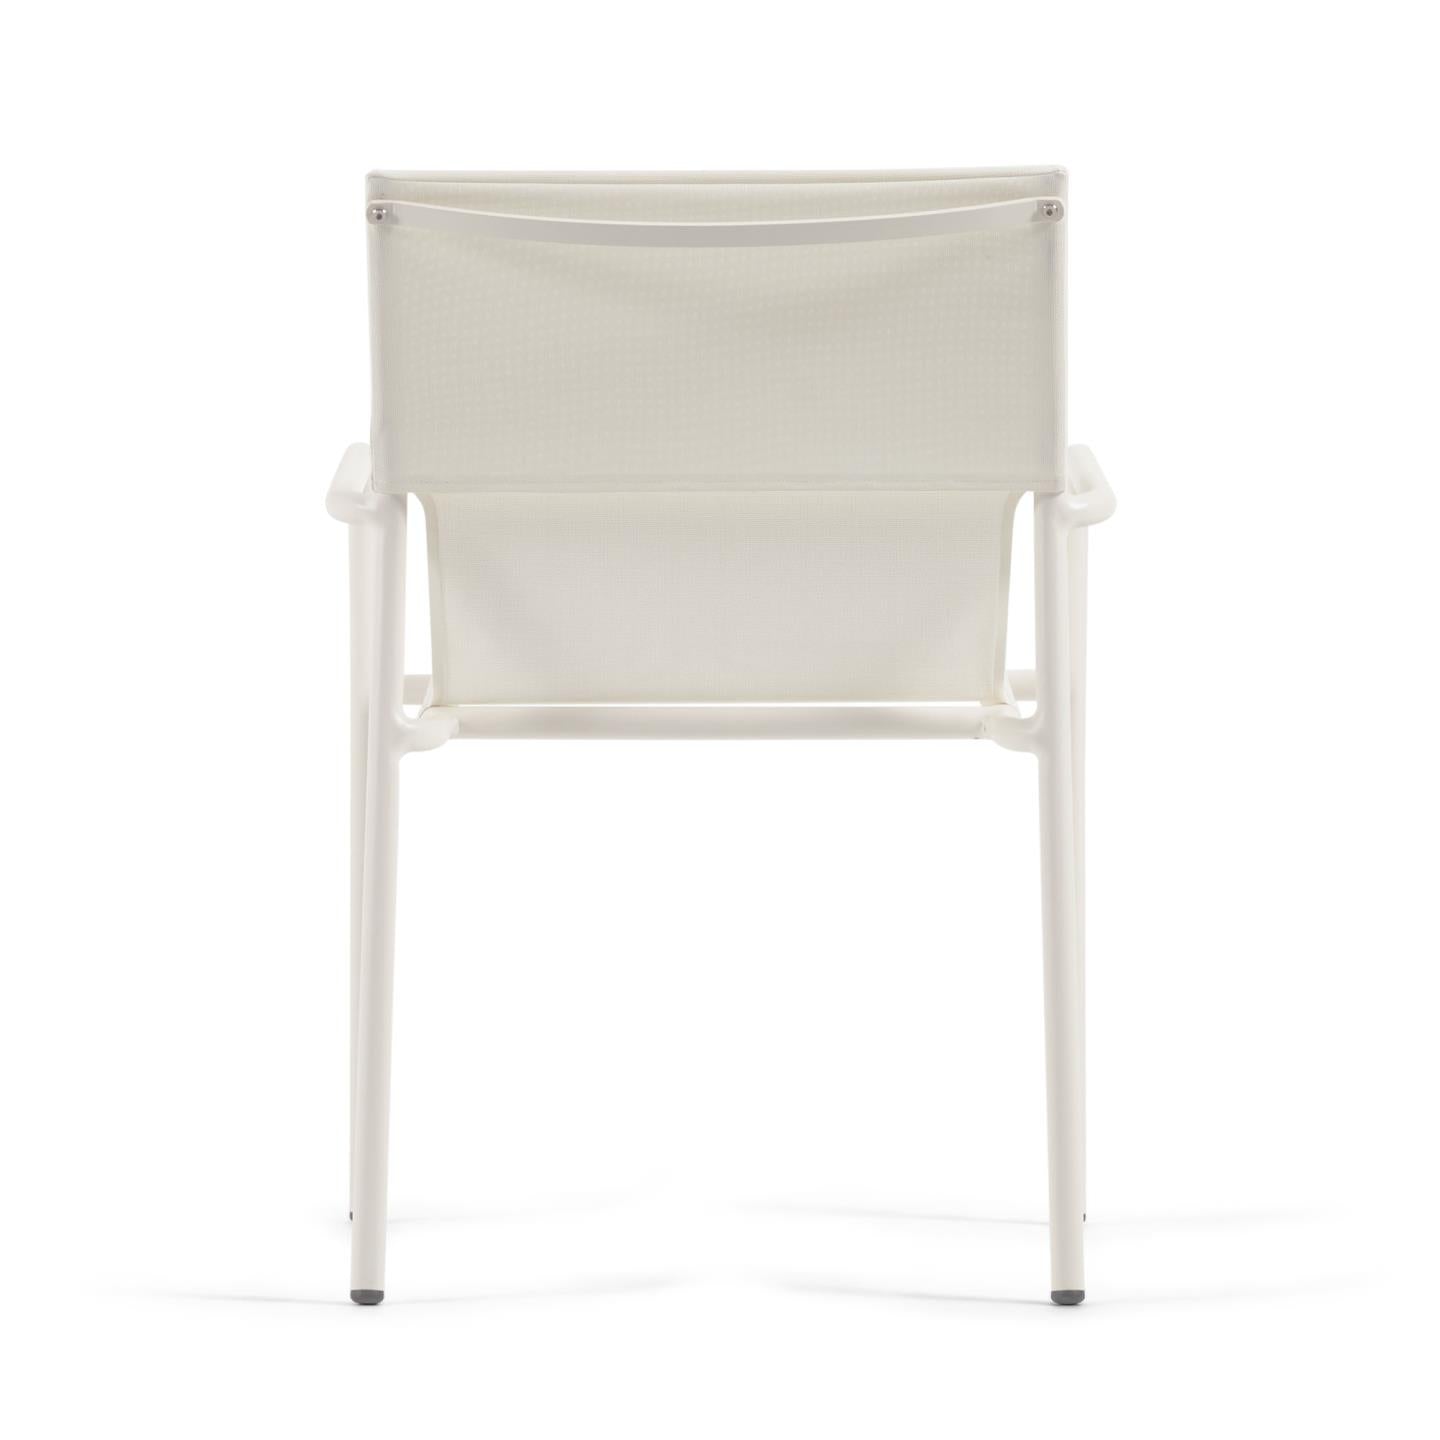 Zaltana stackable outdoor chair in aluminium with a matte white painted finish